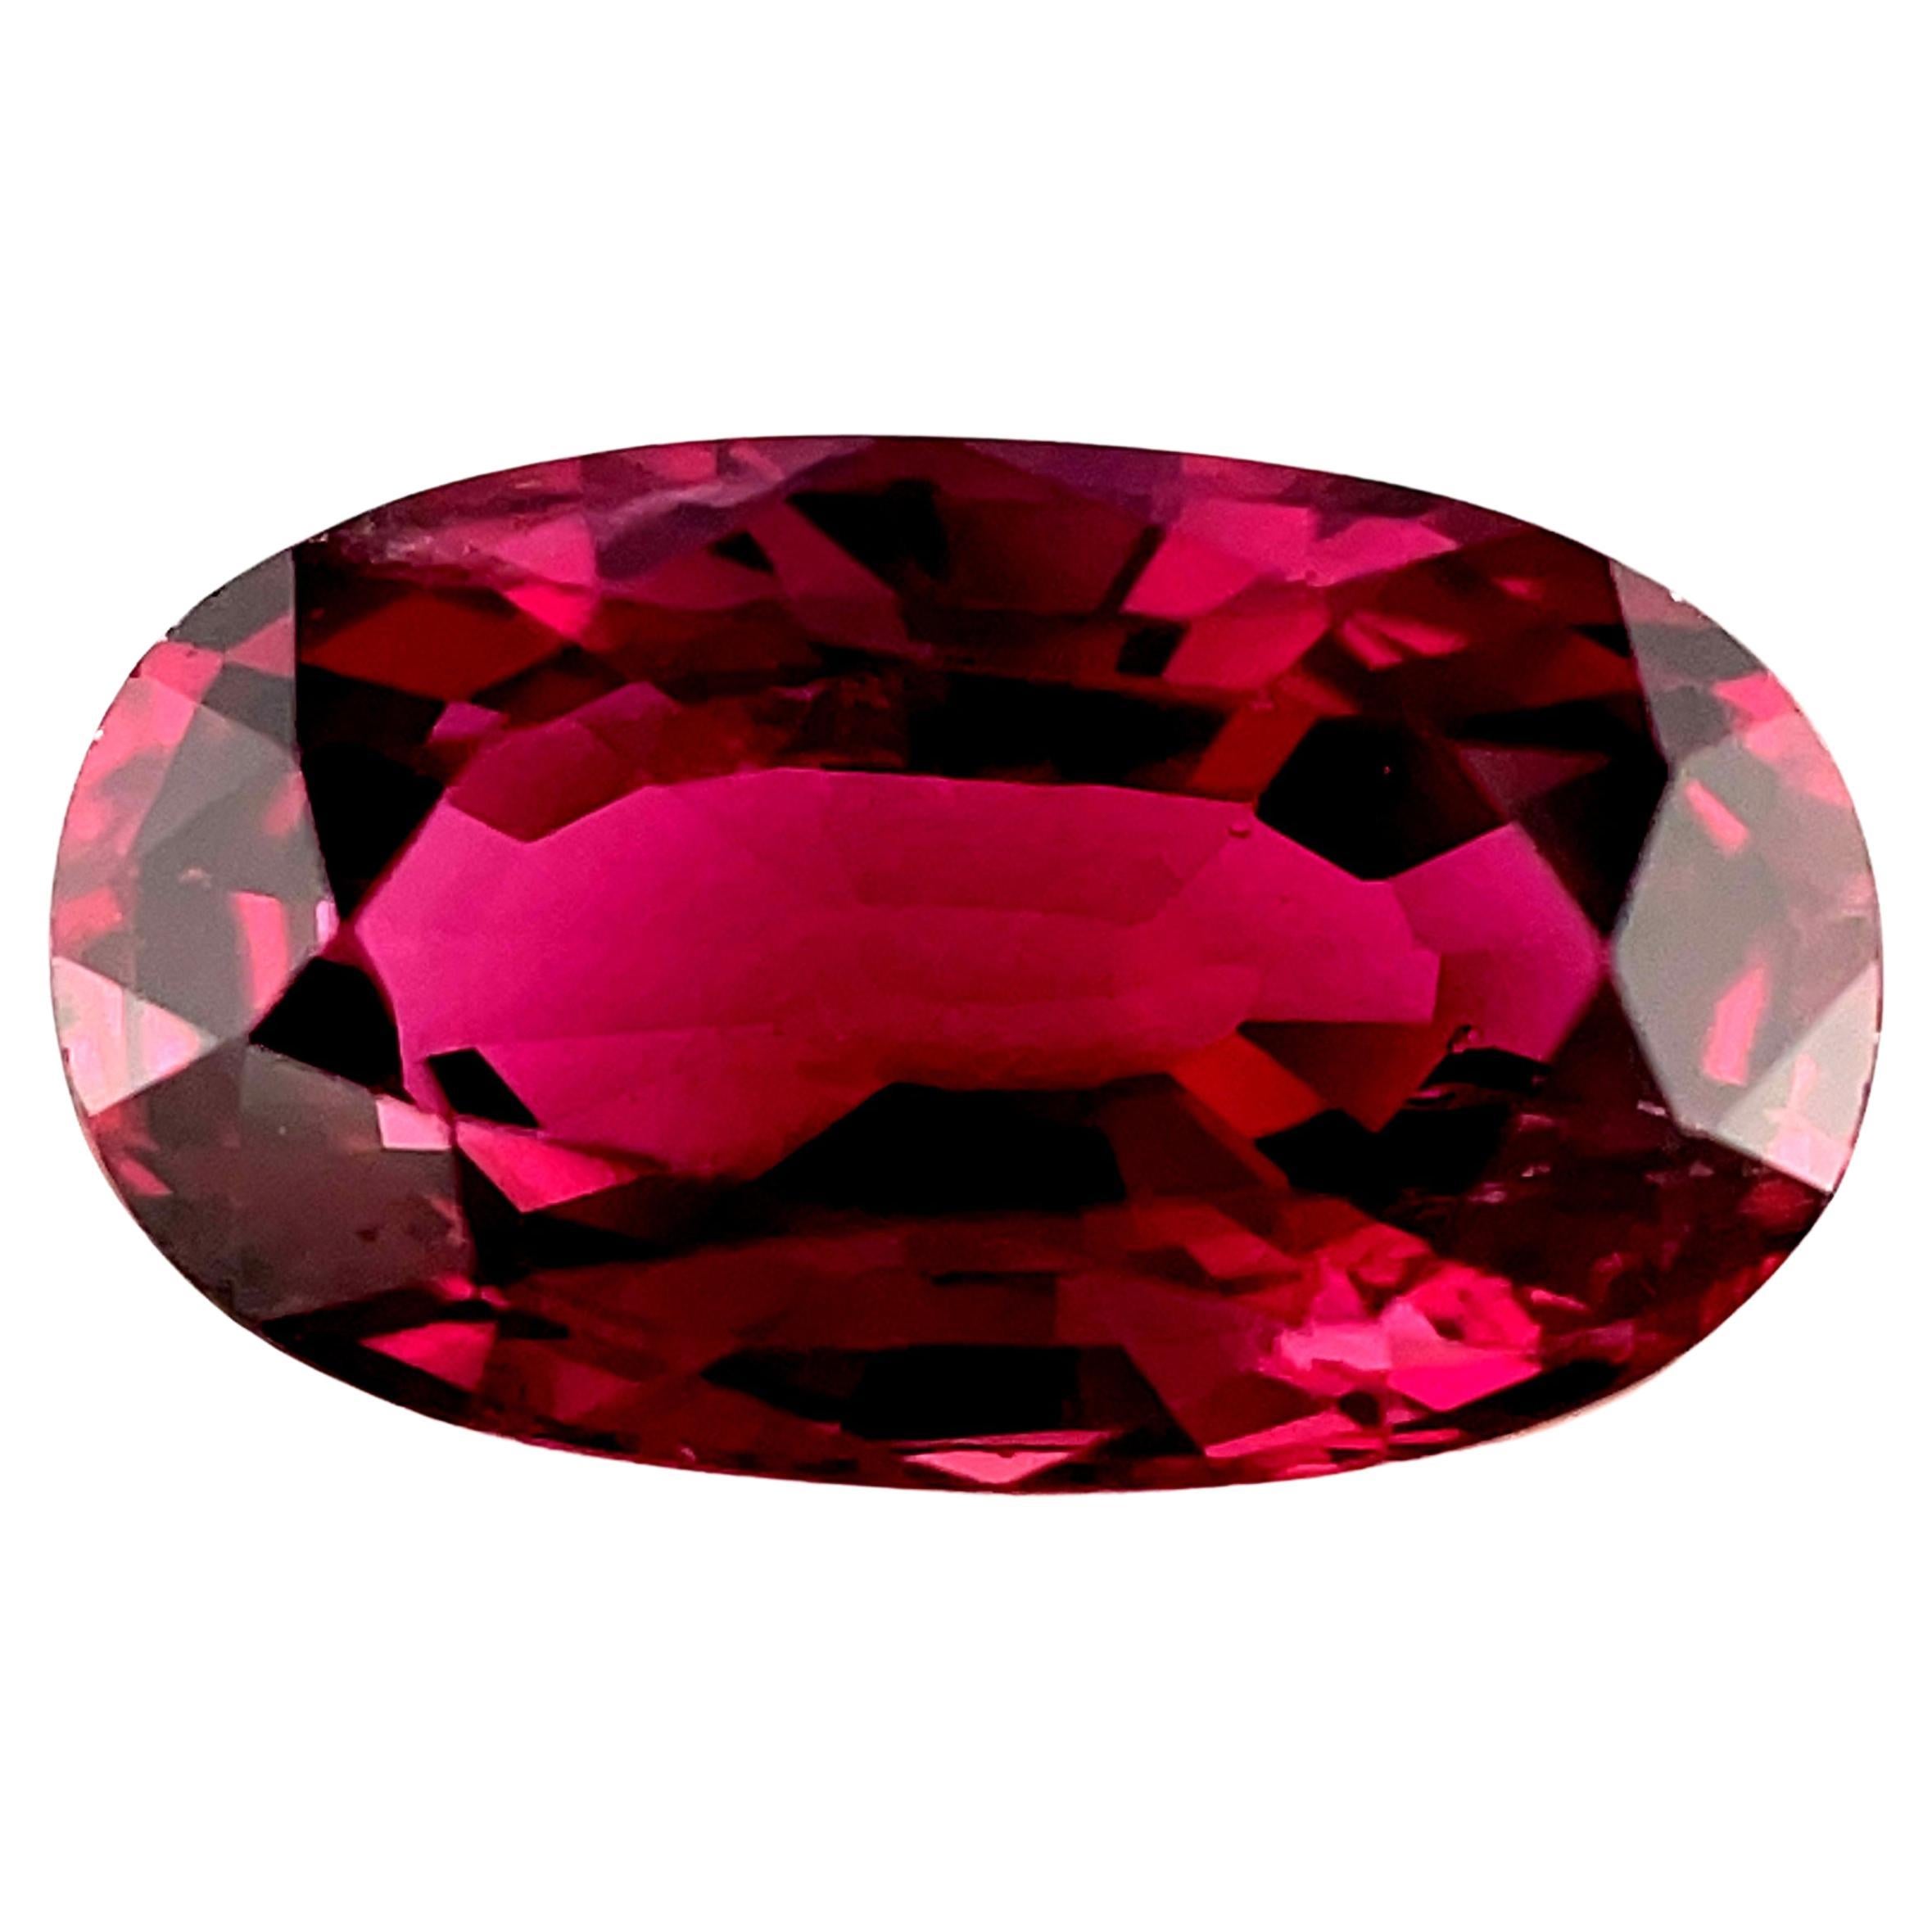 Loose Ruby Gemstone for Engagement or 3-Stone Ring, 1.46 Carat Oval  For Sale